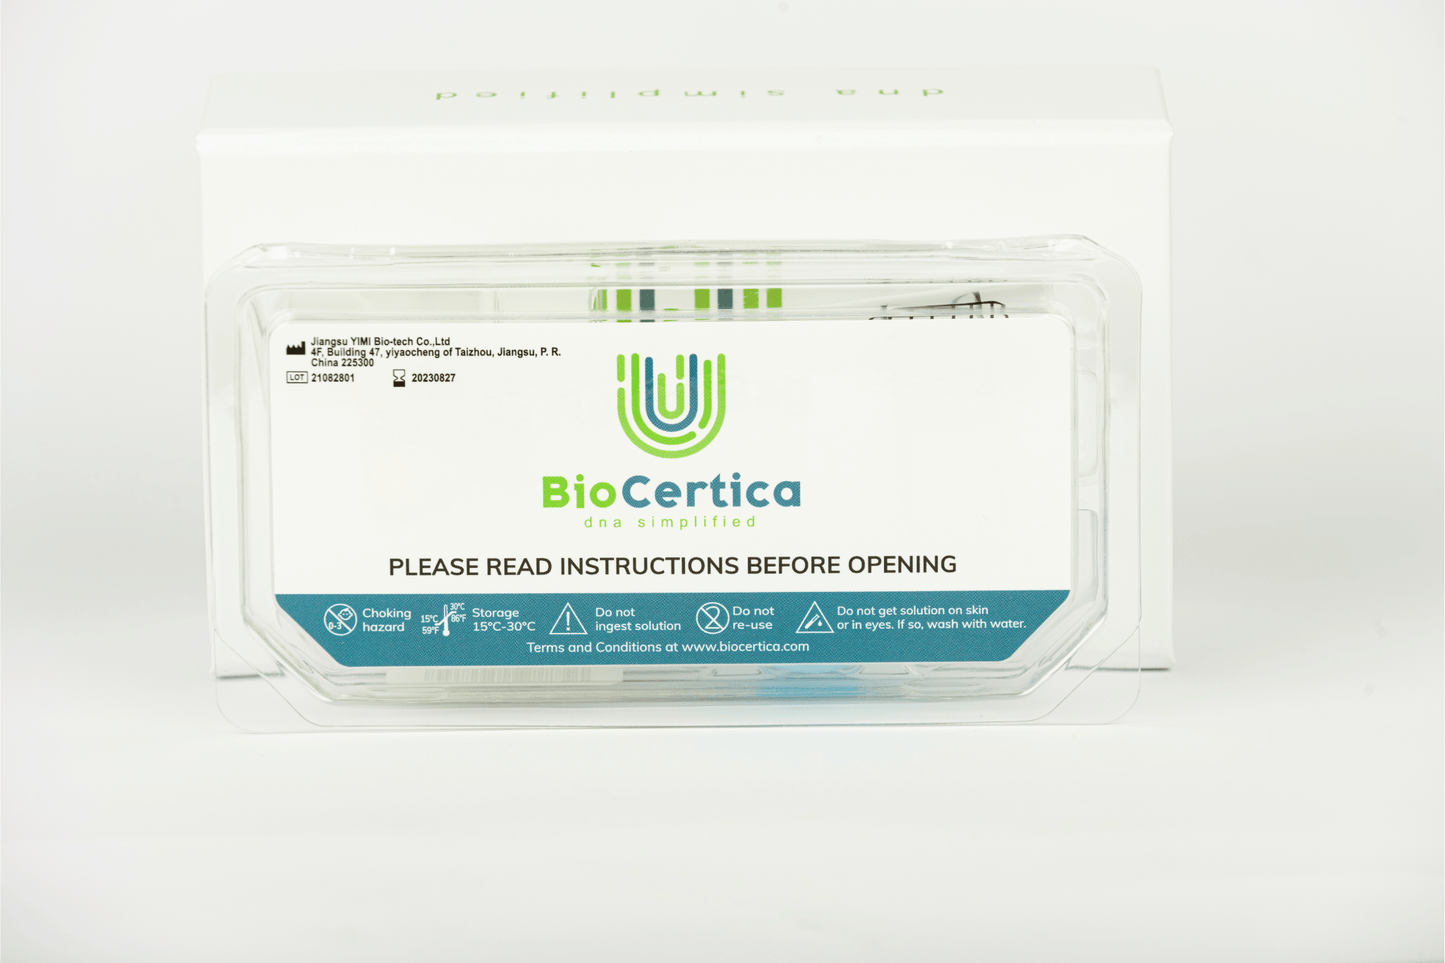 BioCertica collection DNA Traits Test Kit: Unveil Your Genetic Identity